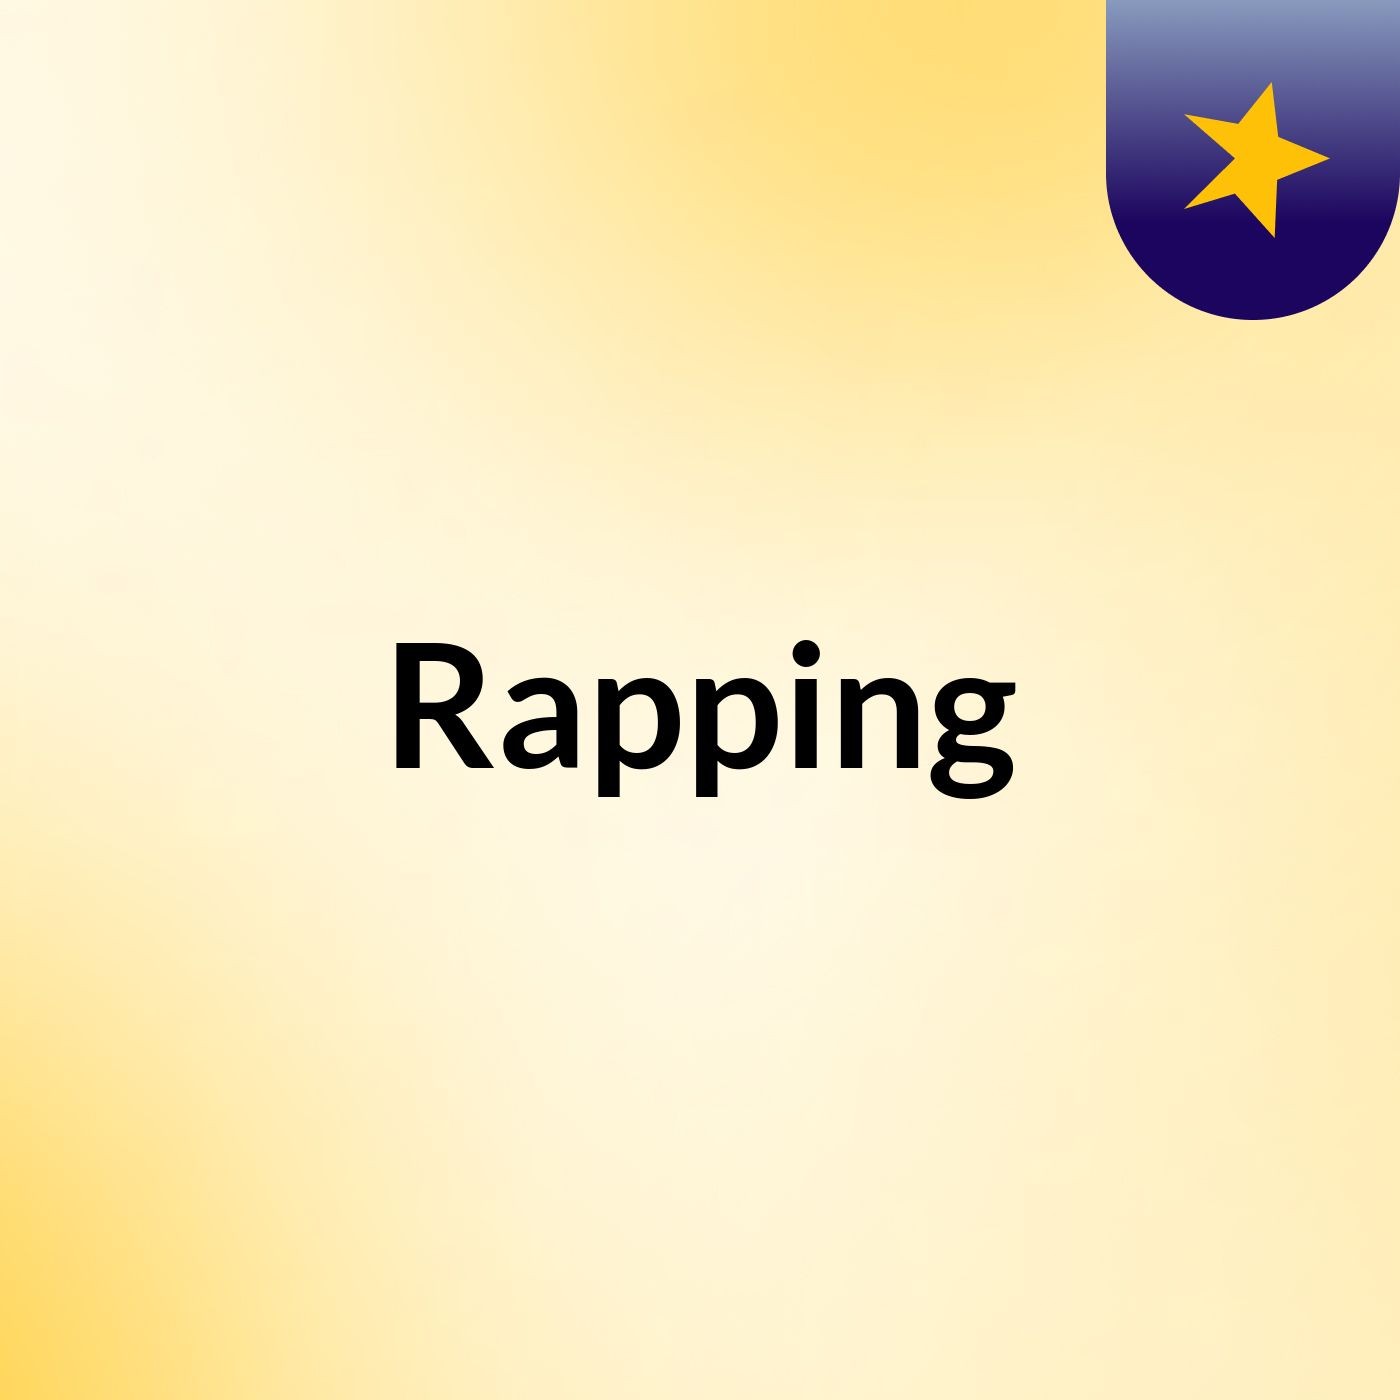 Rapping